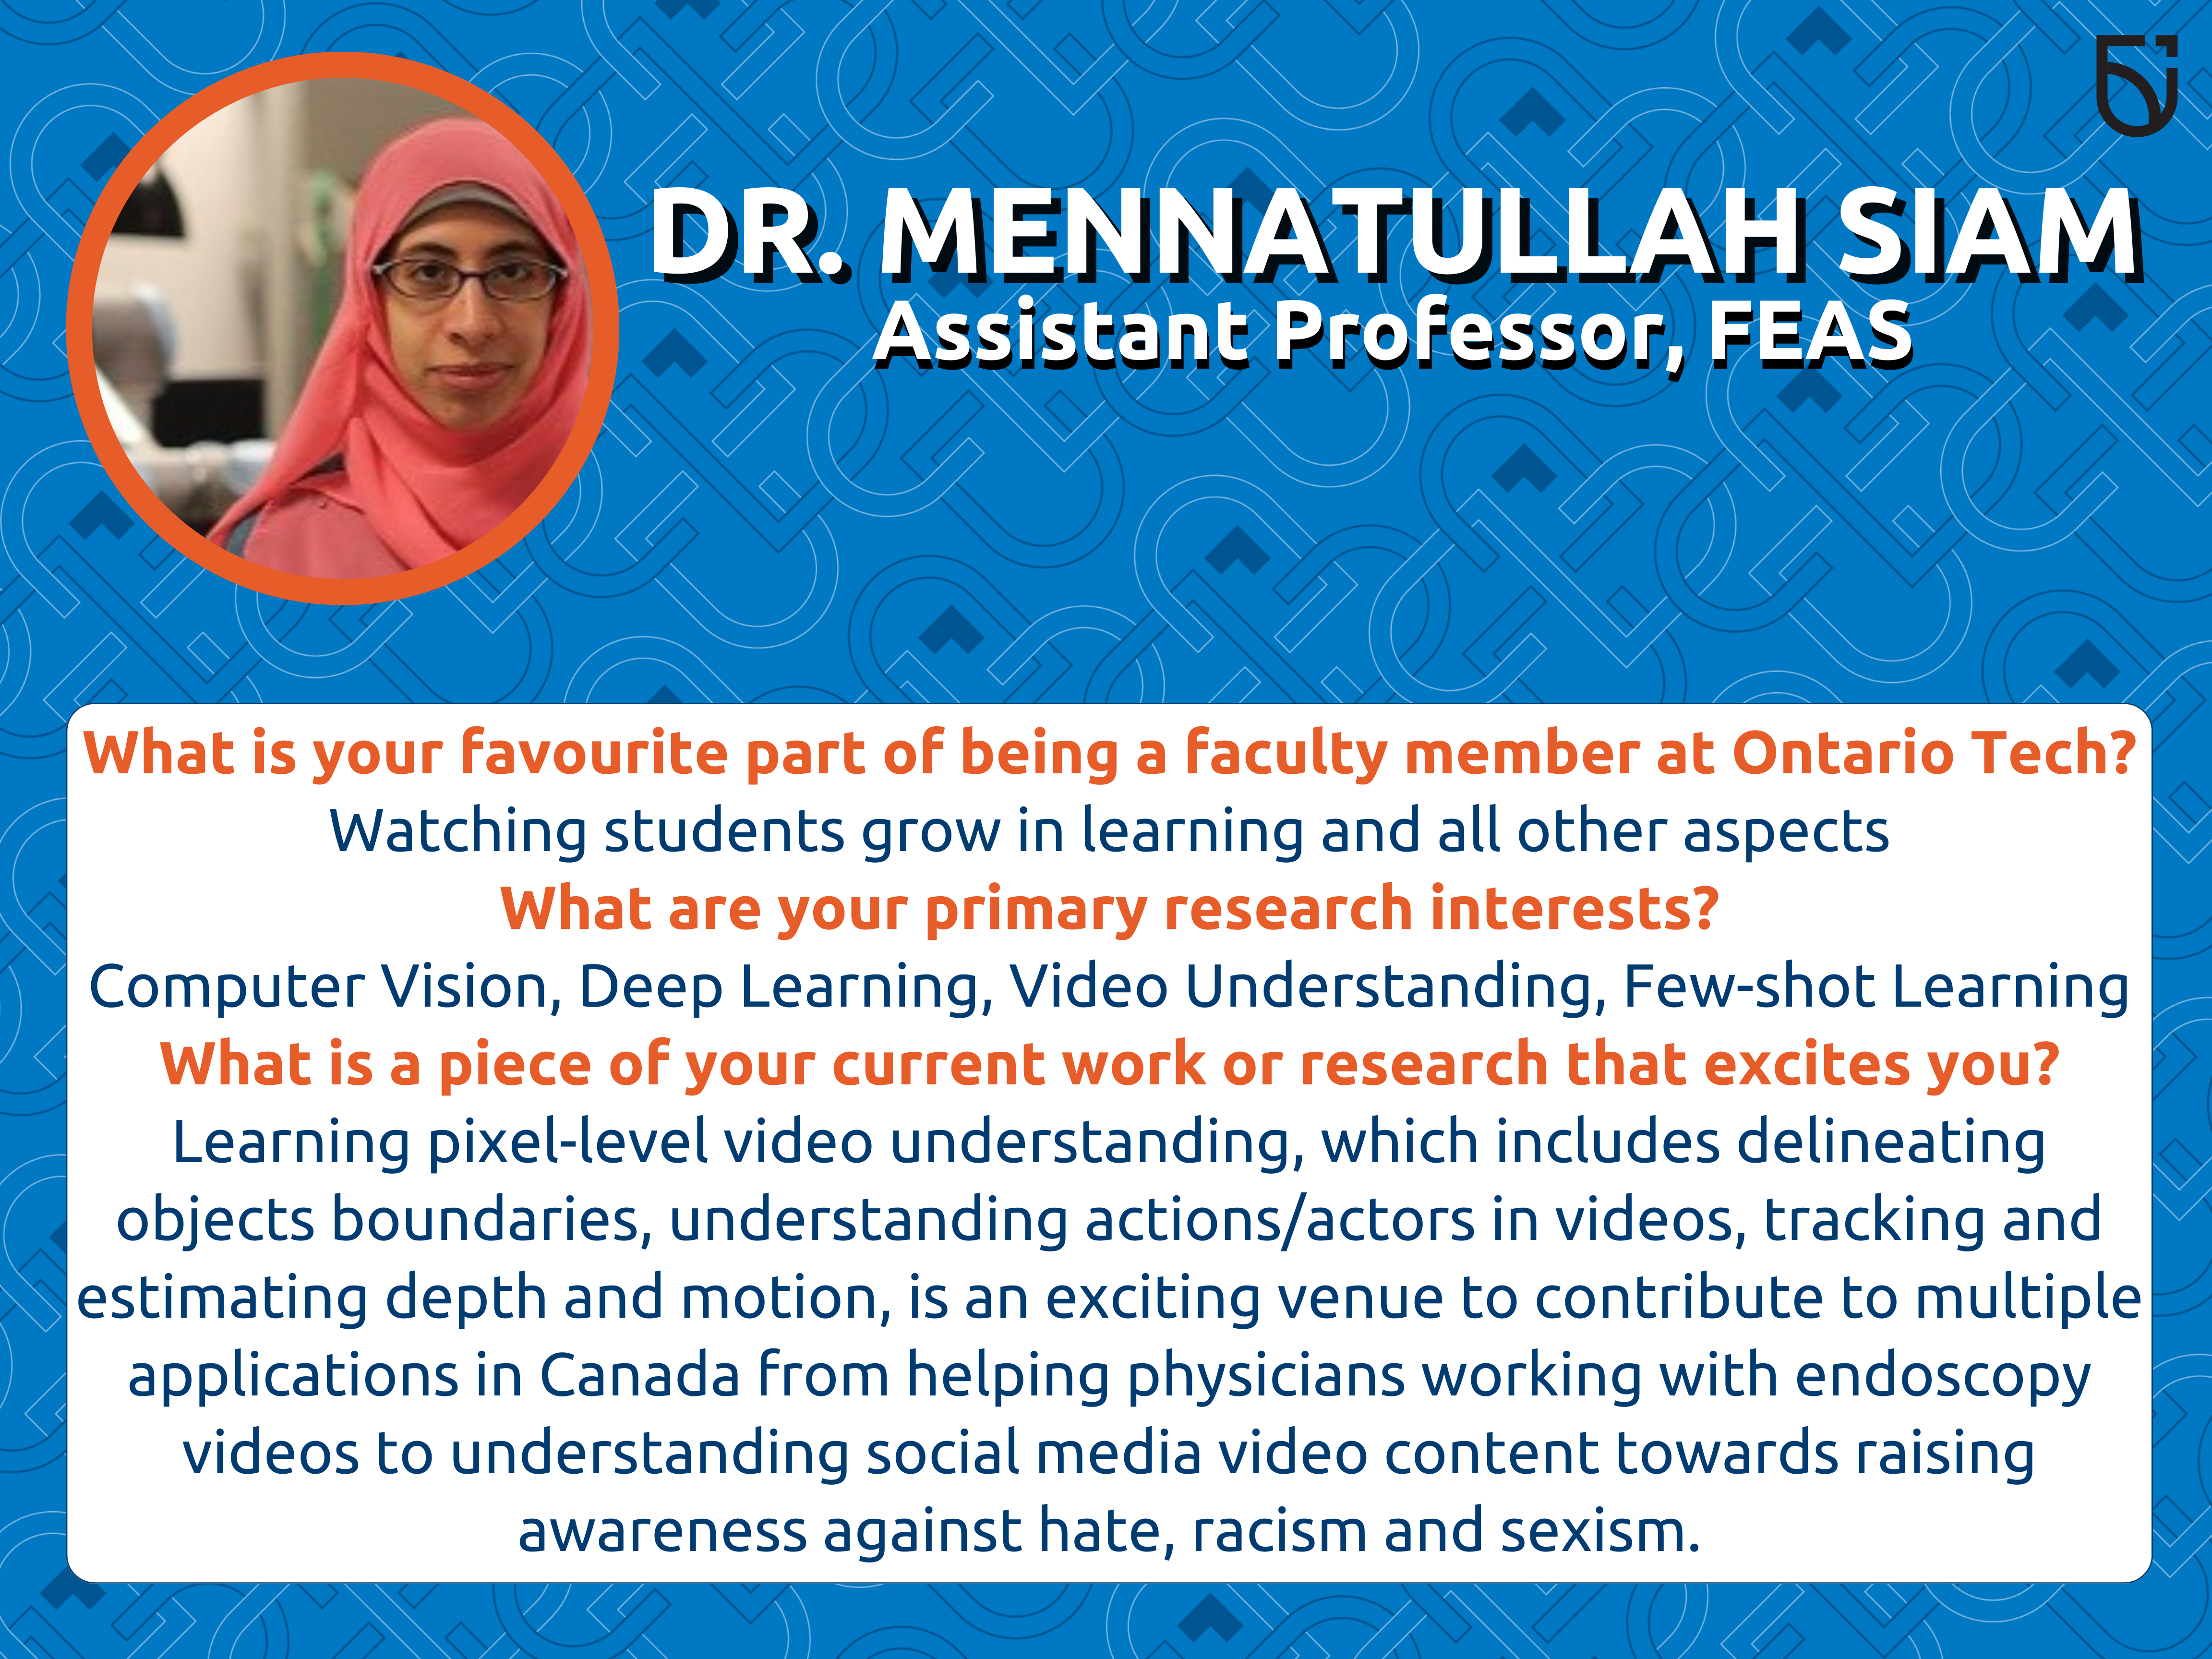 This photo is a Women’s Wednesday feature of Dr. Mennatullah Siam, an Assistant Professor in the Faculty of Engineering and Applied Science